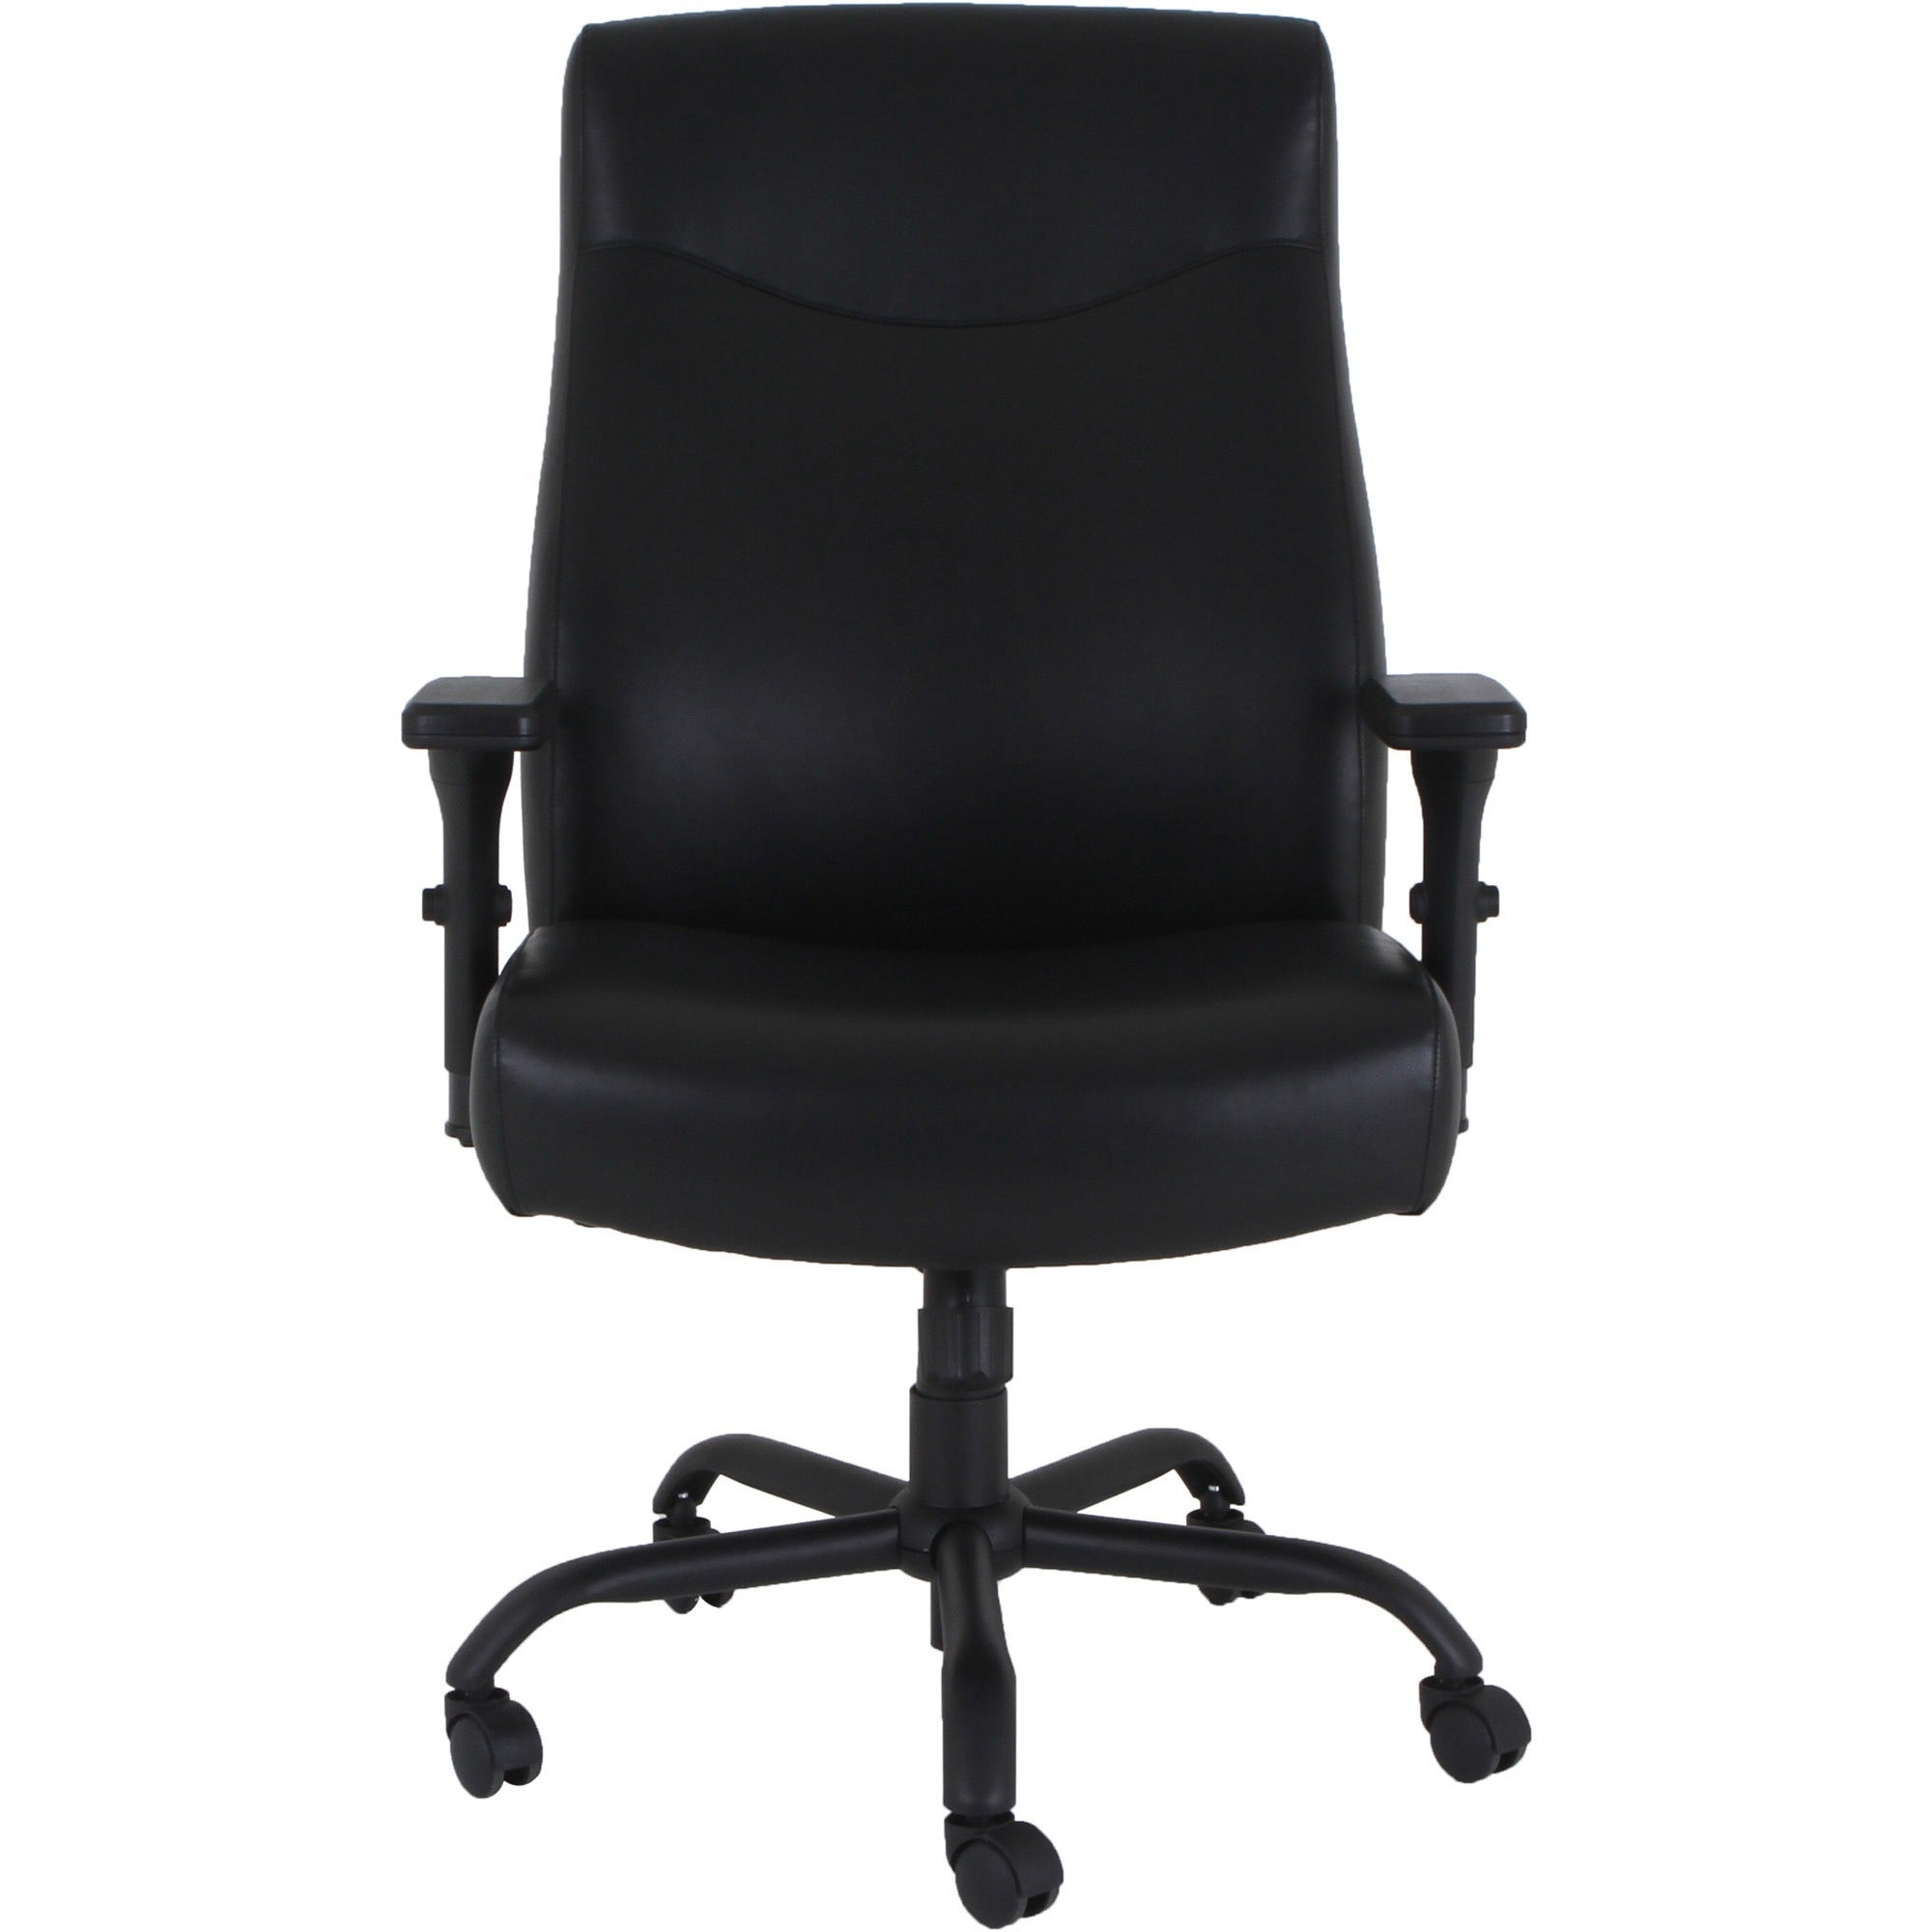 lorell-big-&-tall-executive-high-back-chair-with-adjustable-arms-black-bonded-leather-seat-black-bonded-leather-back-high-back-5-star-base-armrest-1-each_llr48846 - 3